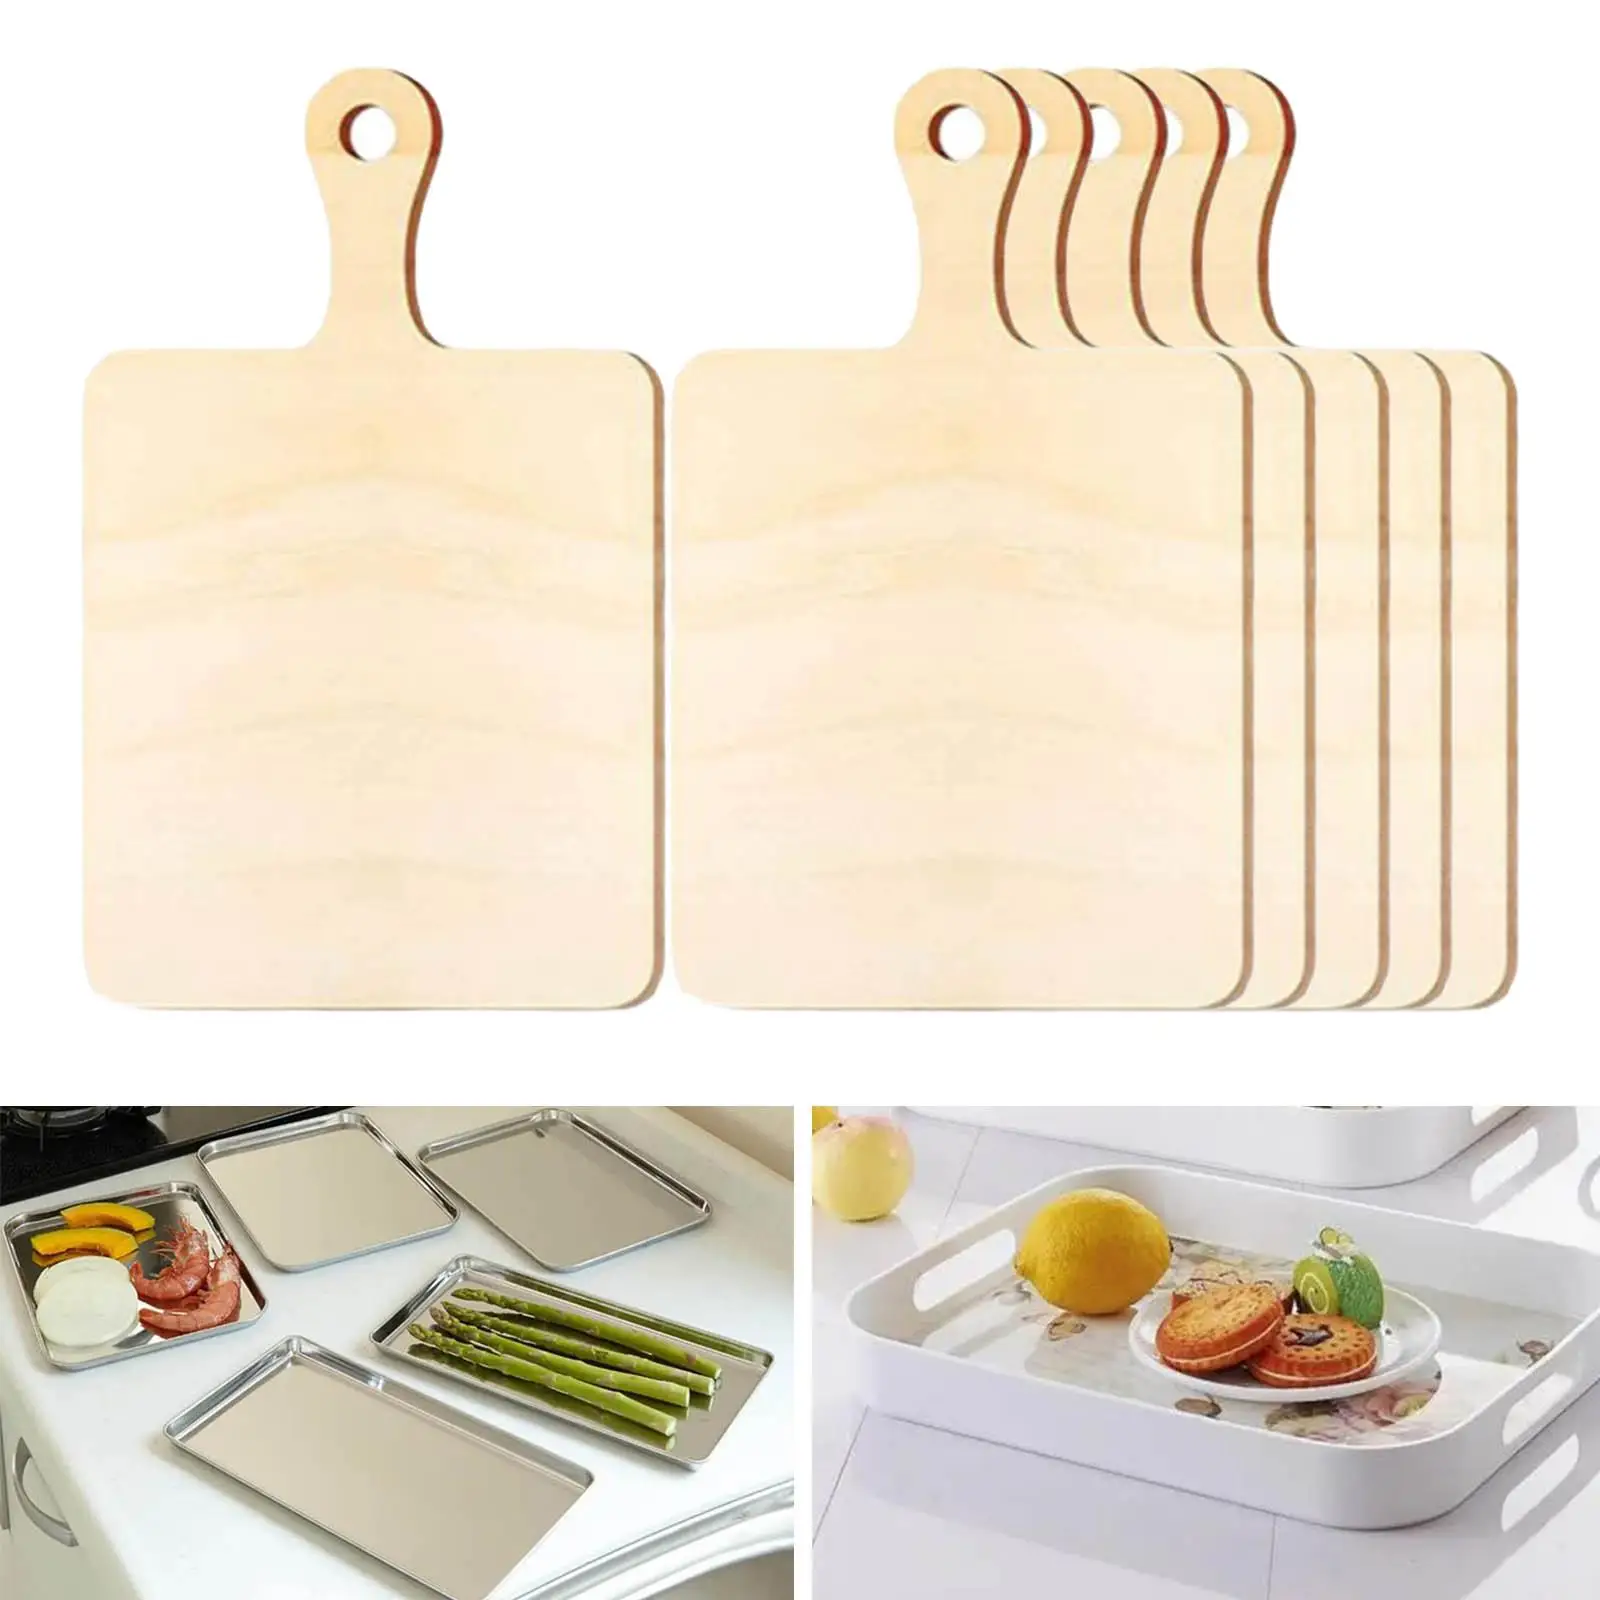 https://ae01.alicdn.com/kf/S14ddba6f814c4da7b10e6b5de6d60d66n/6-Pieces-Mini-Wooden-Chopping-Board-Kit-Board-Tray-Cheese-Board-Wood-Board-for-Crafts-Small.jpg